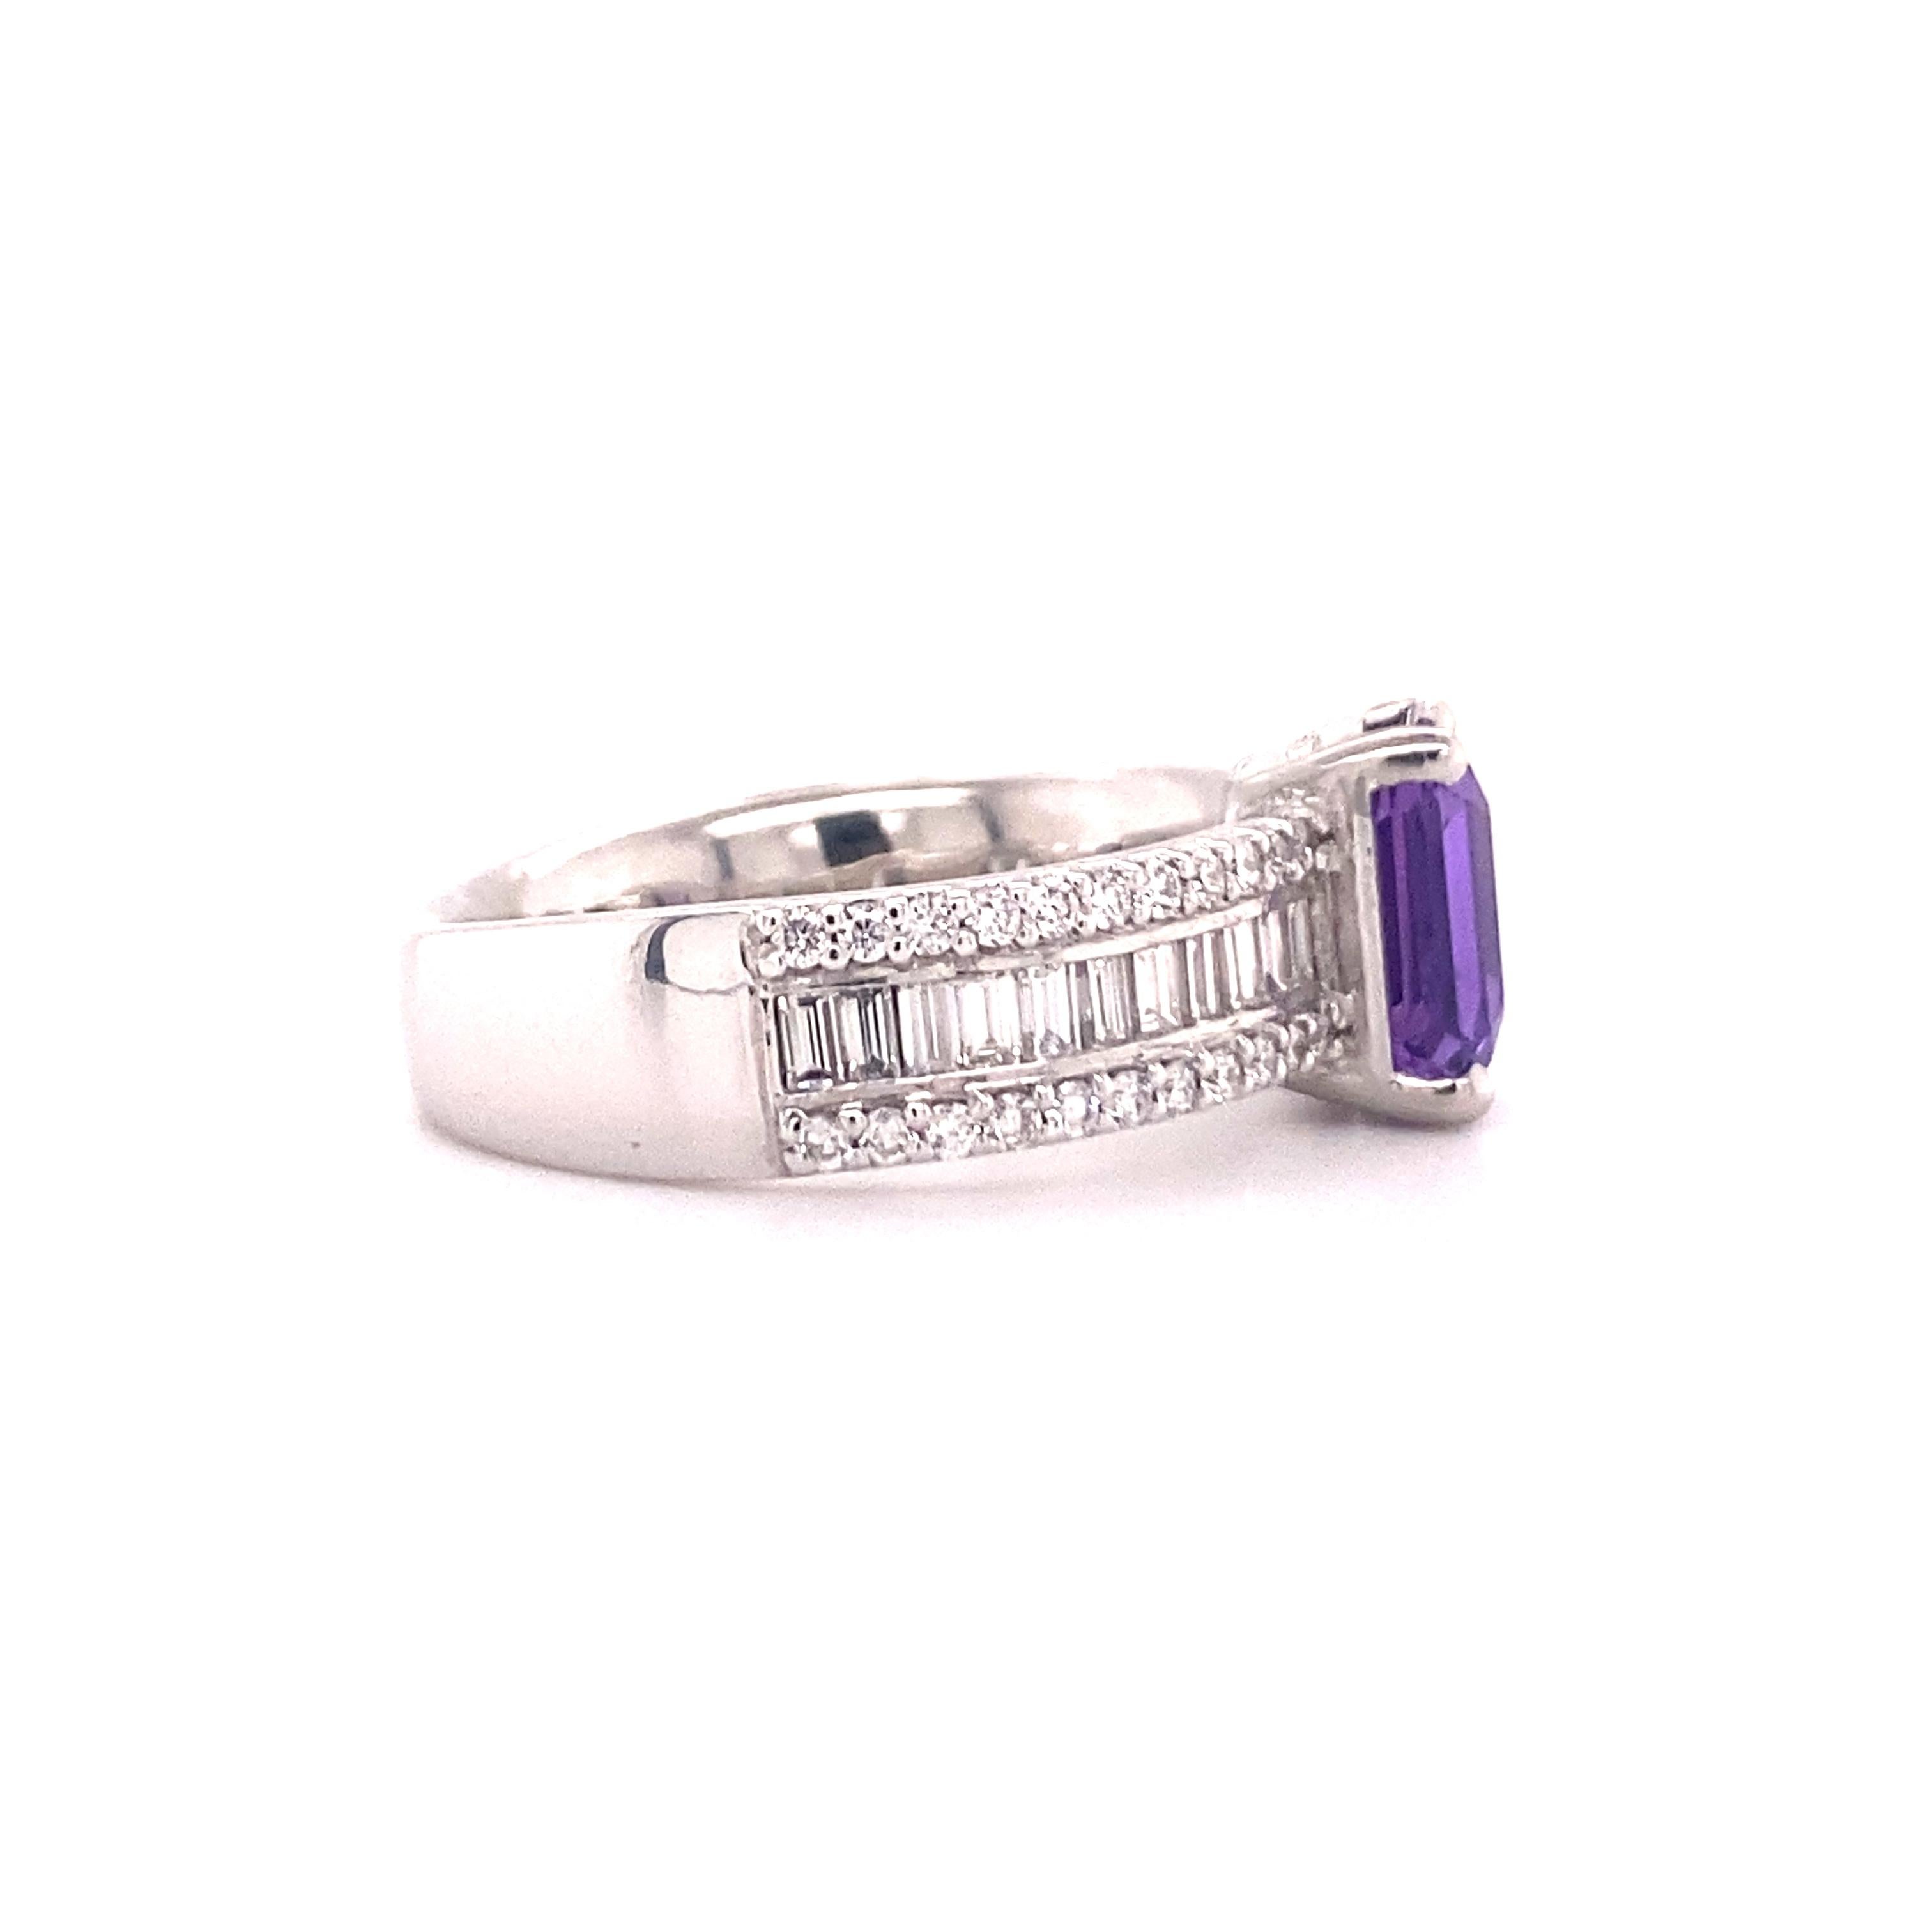 Emerald Cut Sparkling Purple Sapphire Ring with Diamonds Set in Platinum 950 For Sale